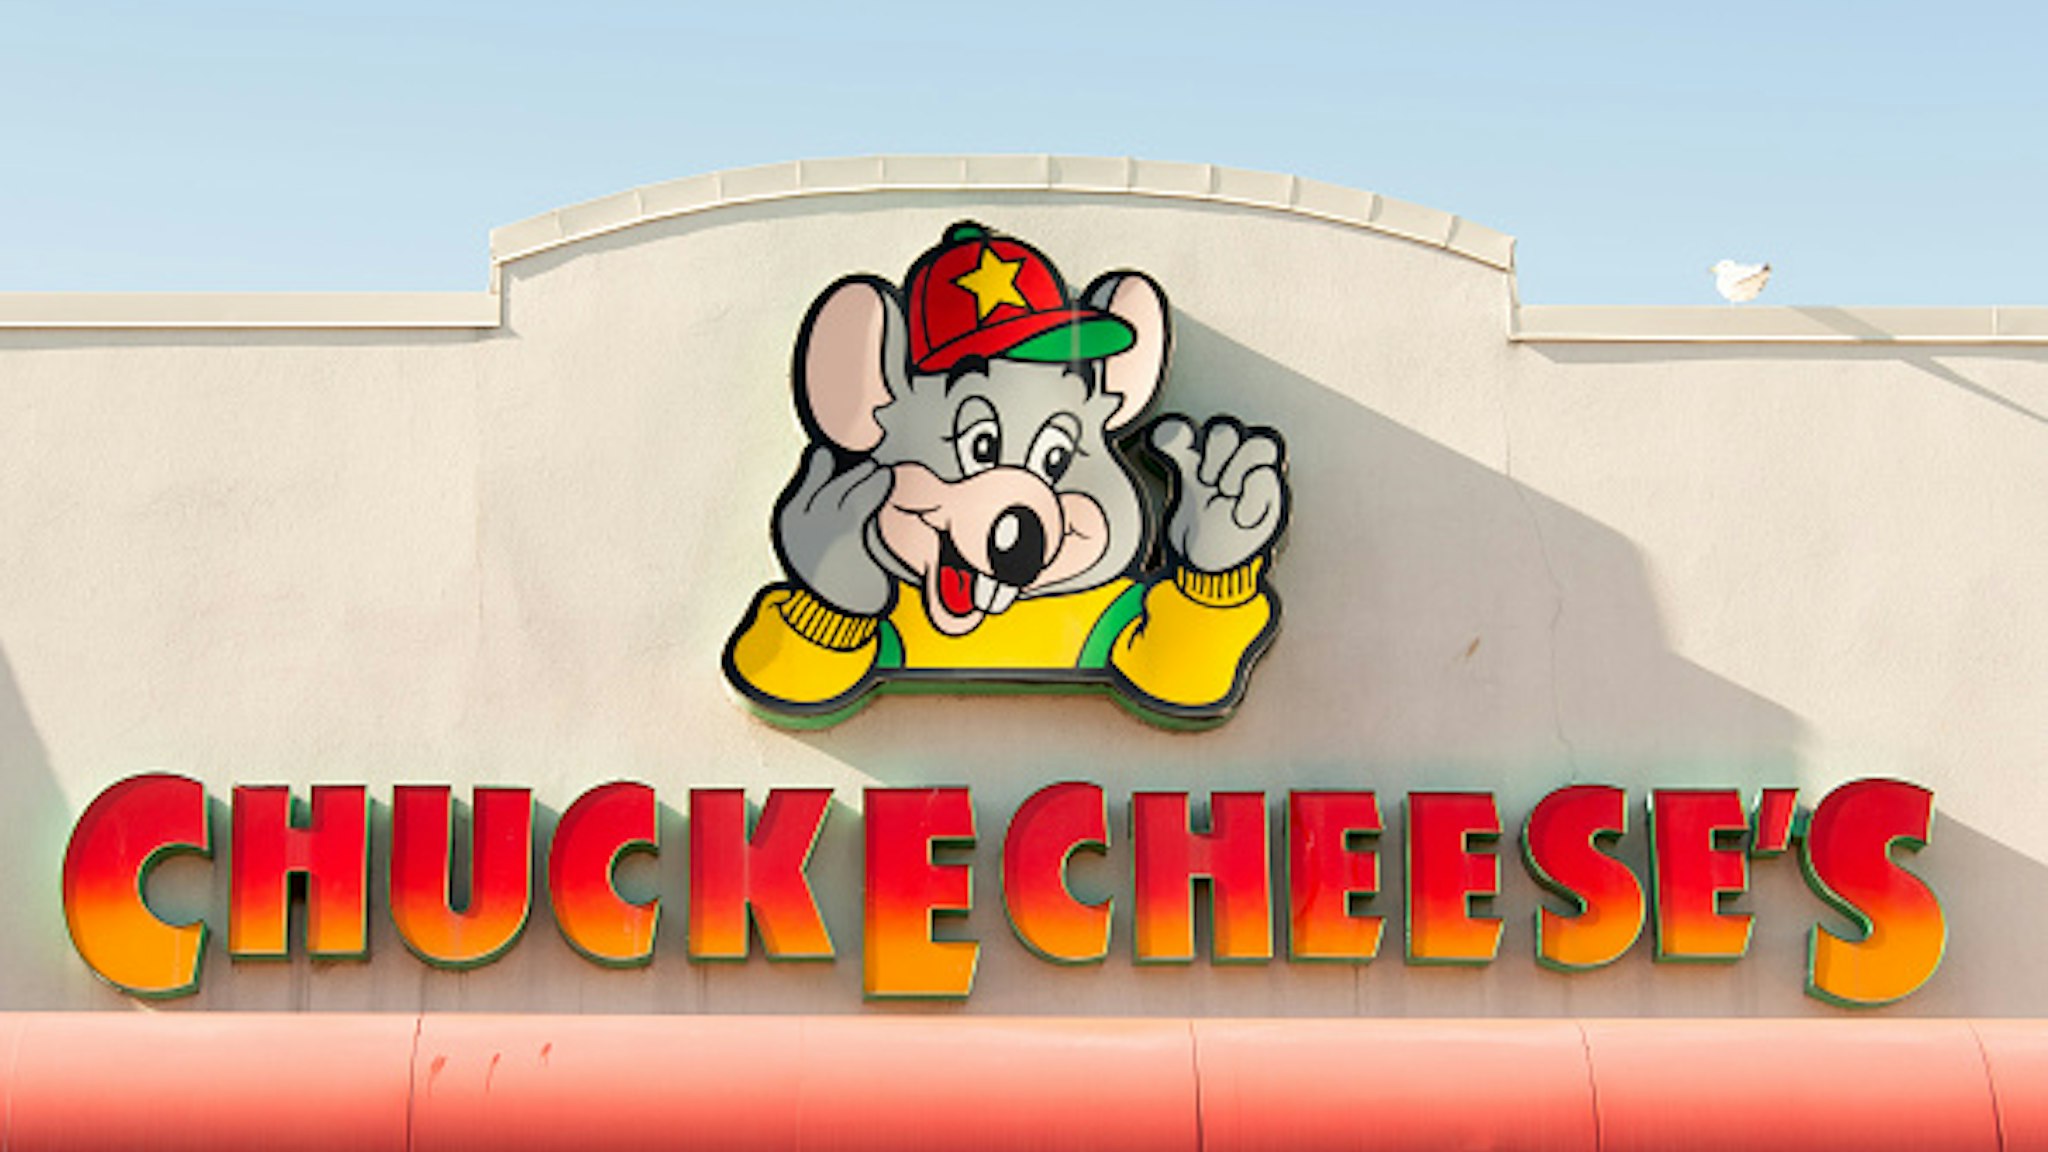 TORONTO, ONTARIO, CANADA - 2015/03/28: Chuck E Cheese entrance. Chuck E. Cheese's is a chain of American family entertainment center restaurants. The chain is the primary brand of CEC Entertainment, Inc.